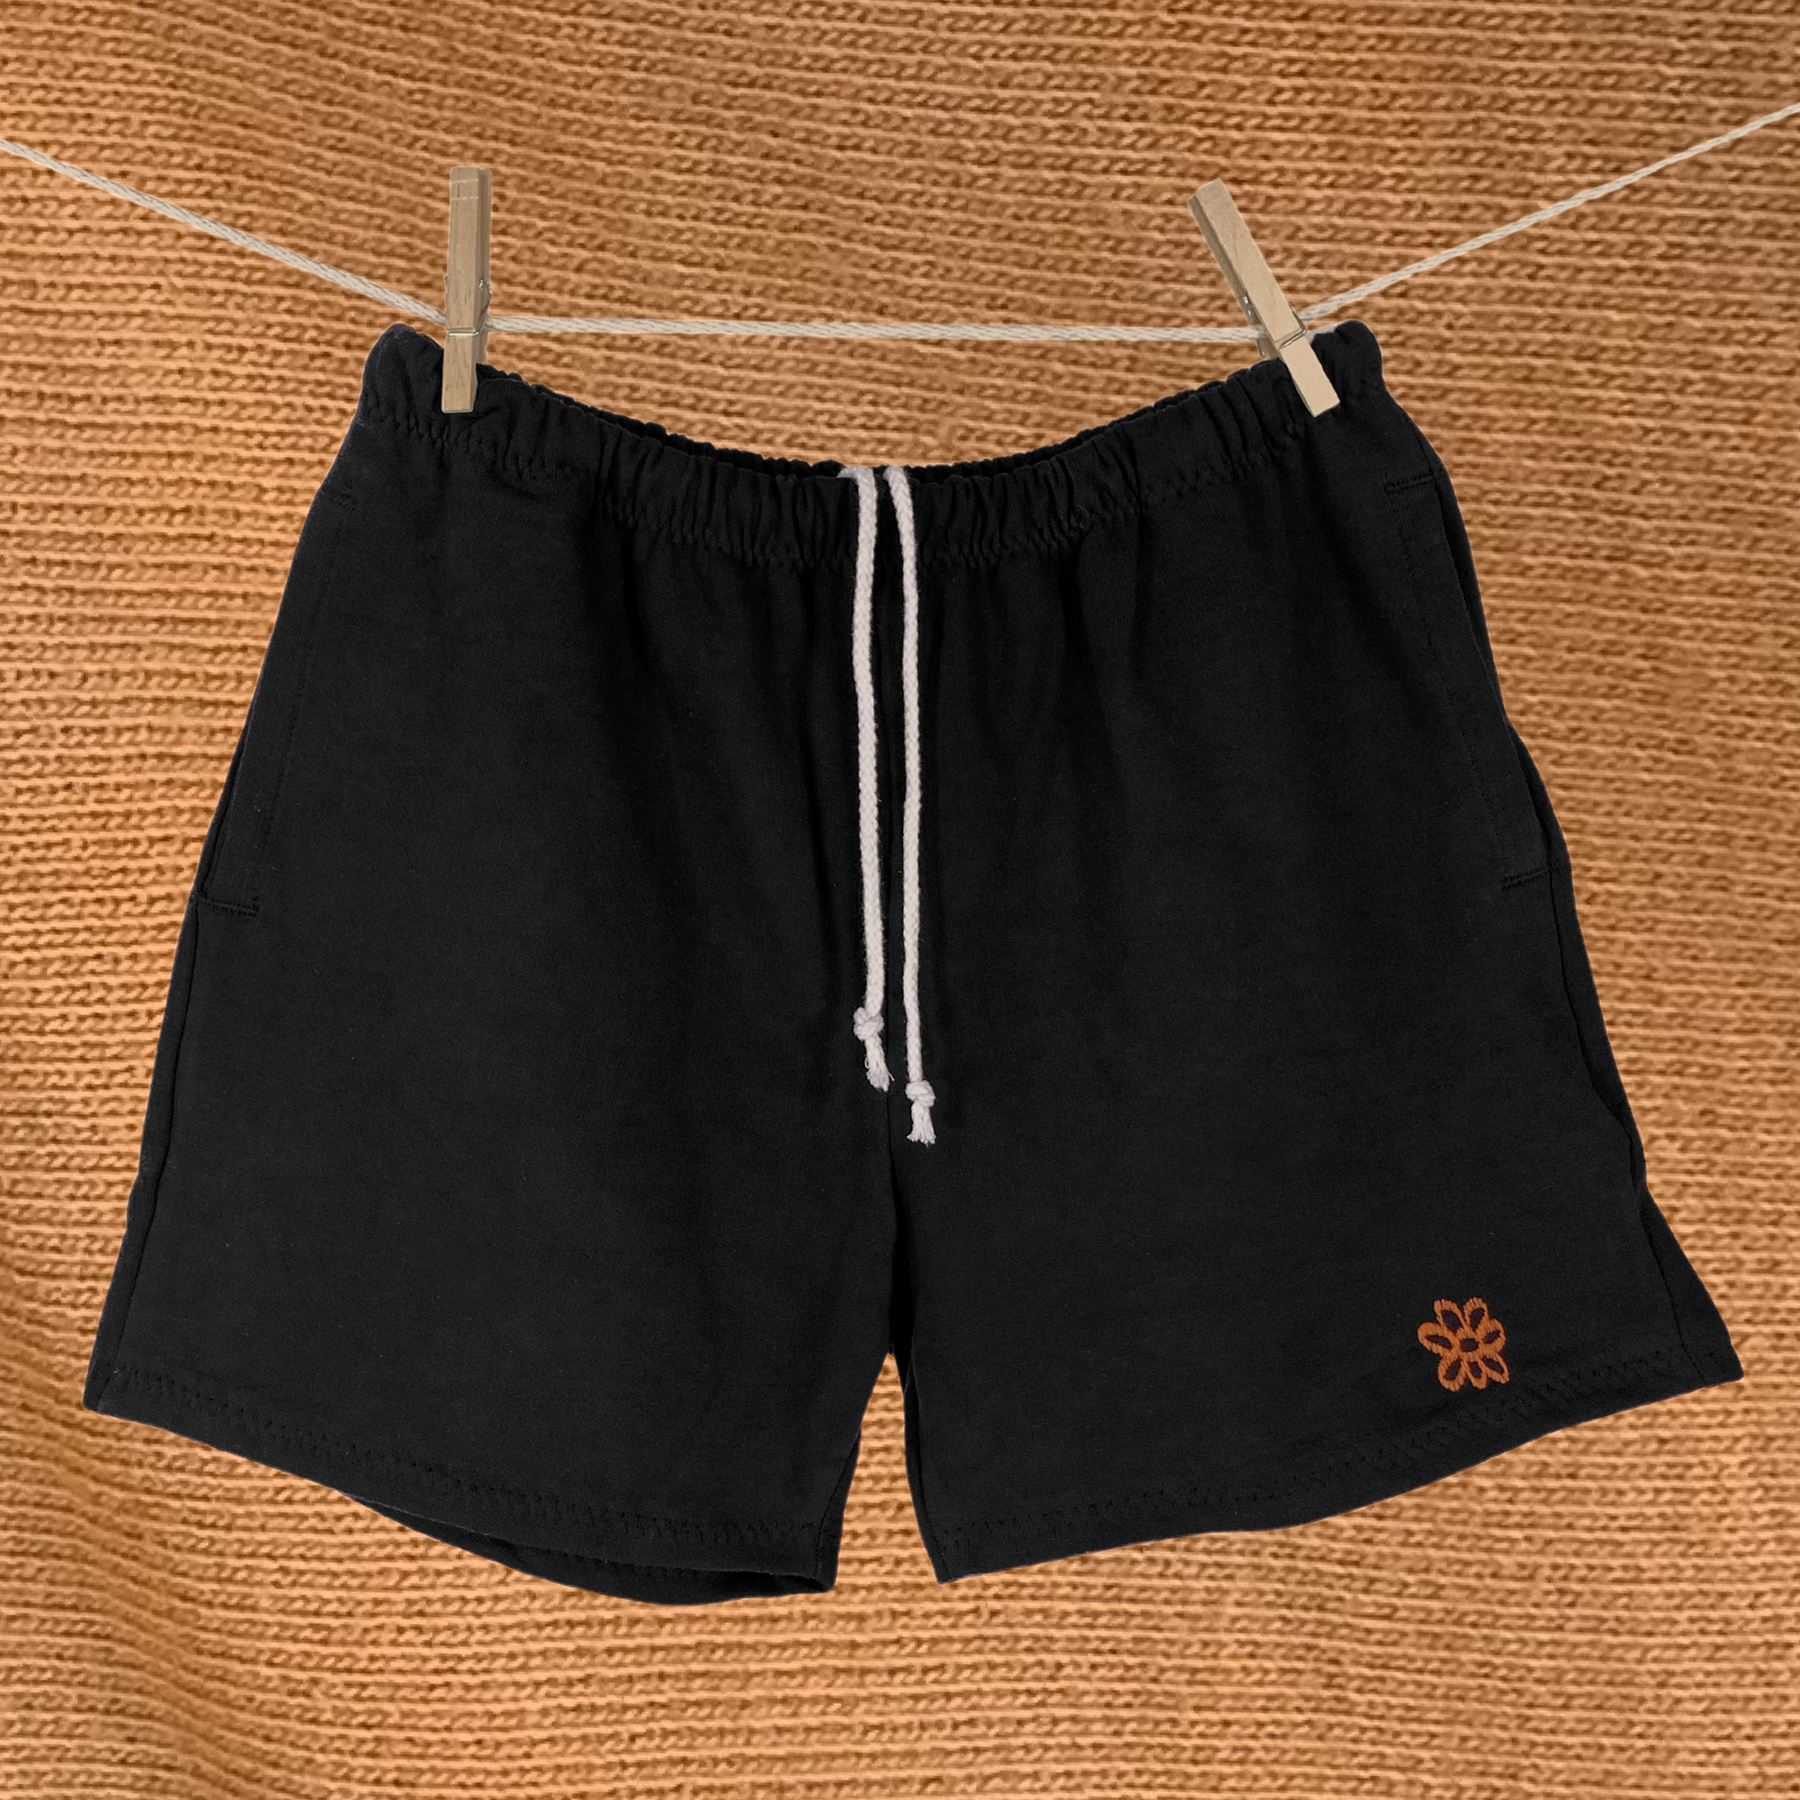 Organic cotton embroidered shorts S-M